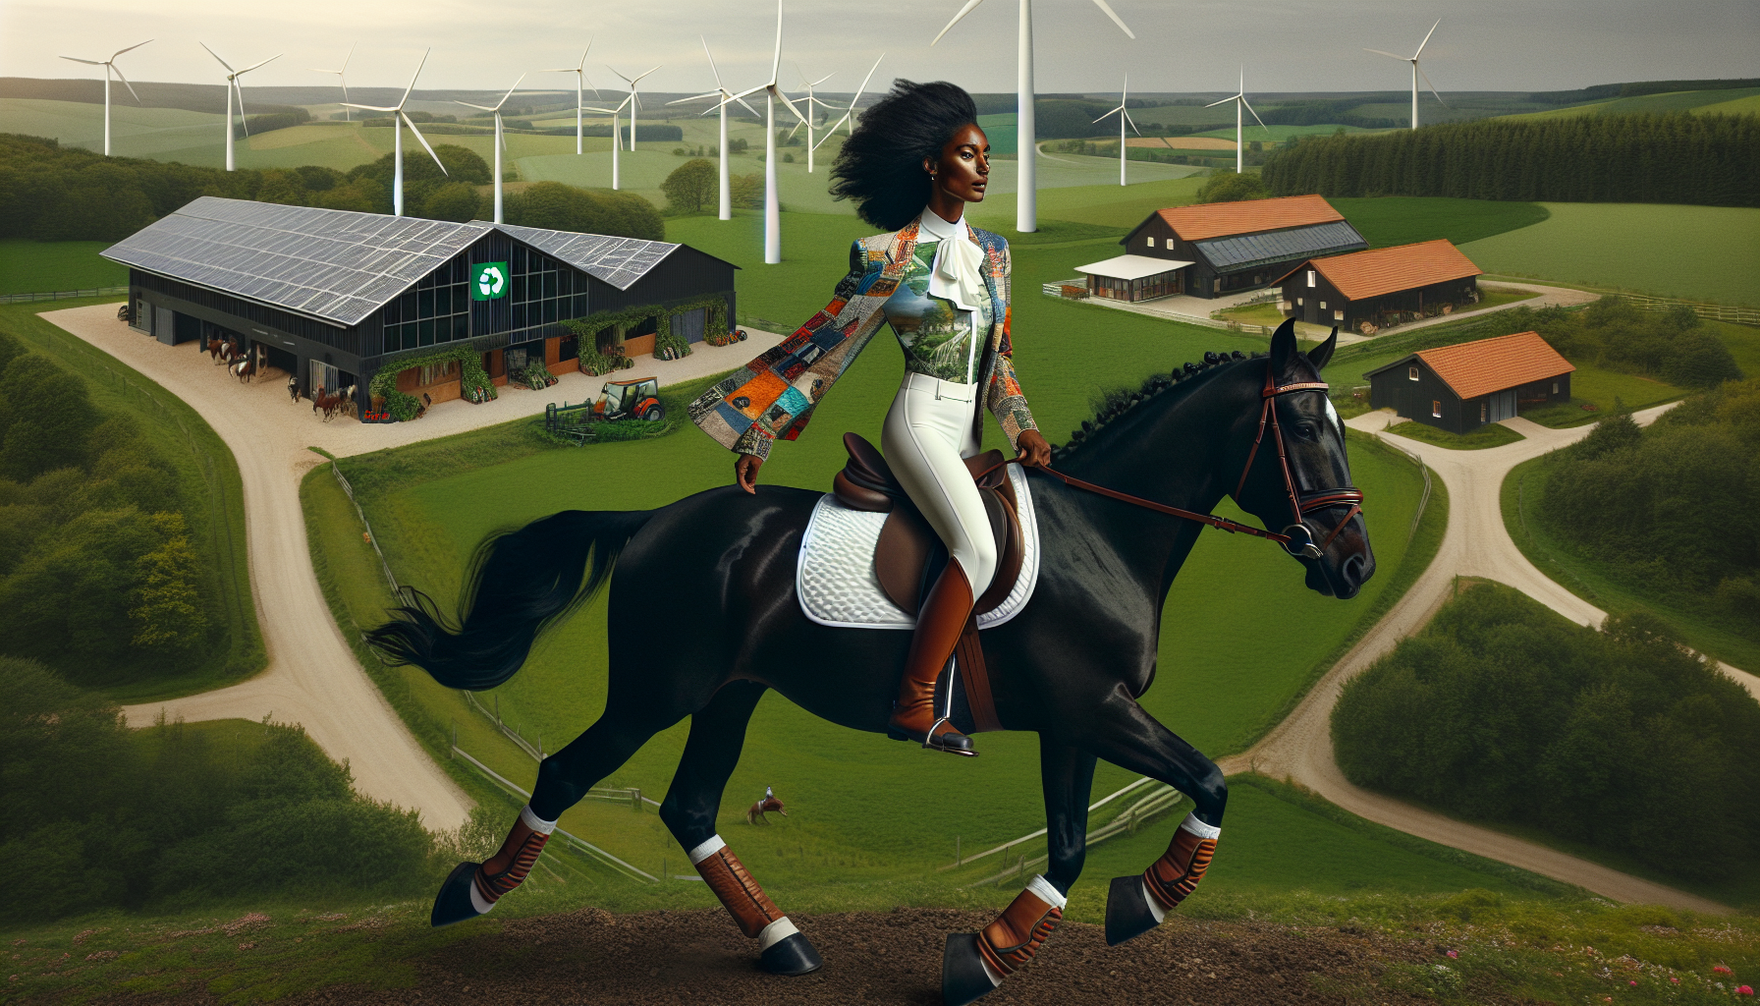 An image showing a shift towards sustainable equestrian fashion in a stylish way. A woman of Black descent, dressed in eco-friendly riding attire, is seen confidently galloping on a healthy horse thro